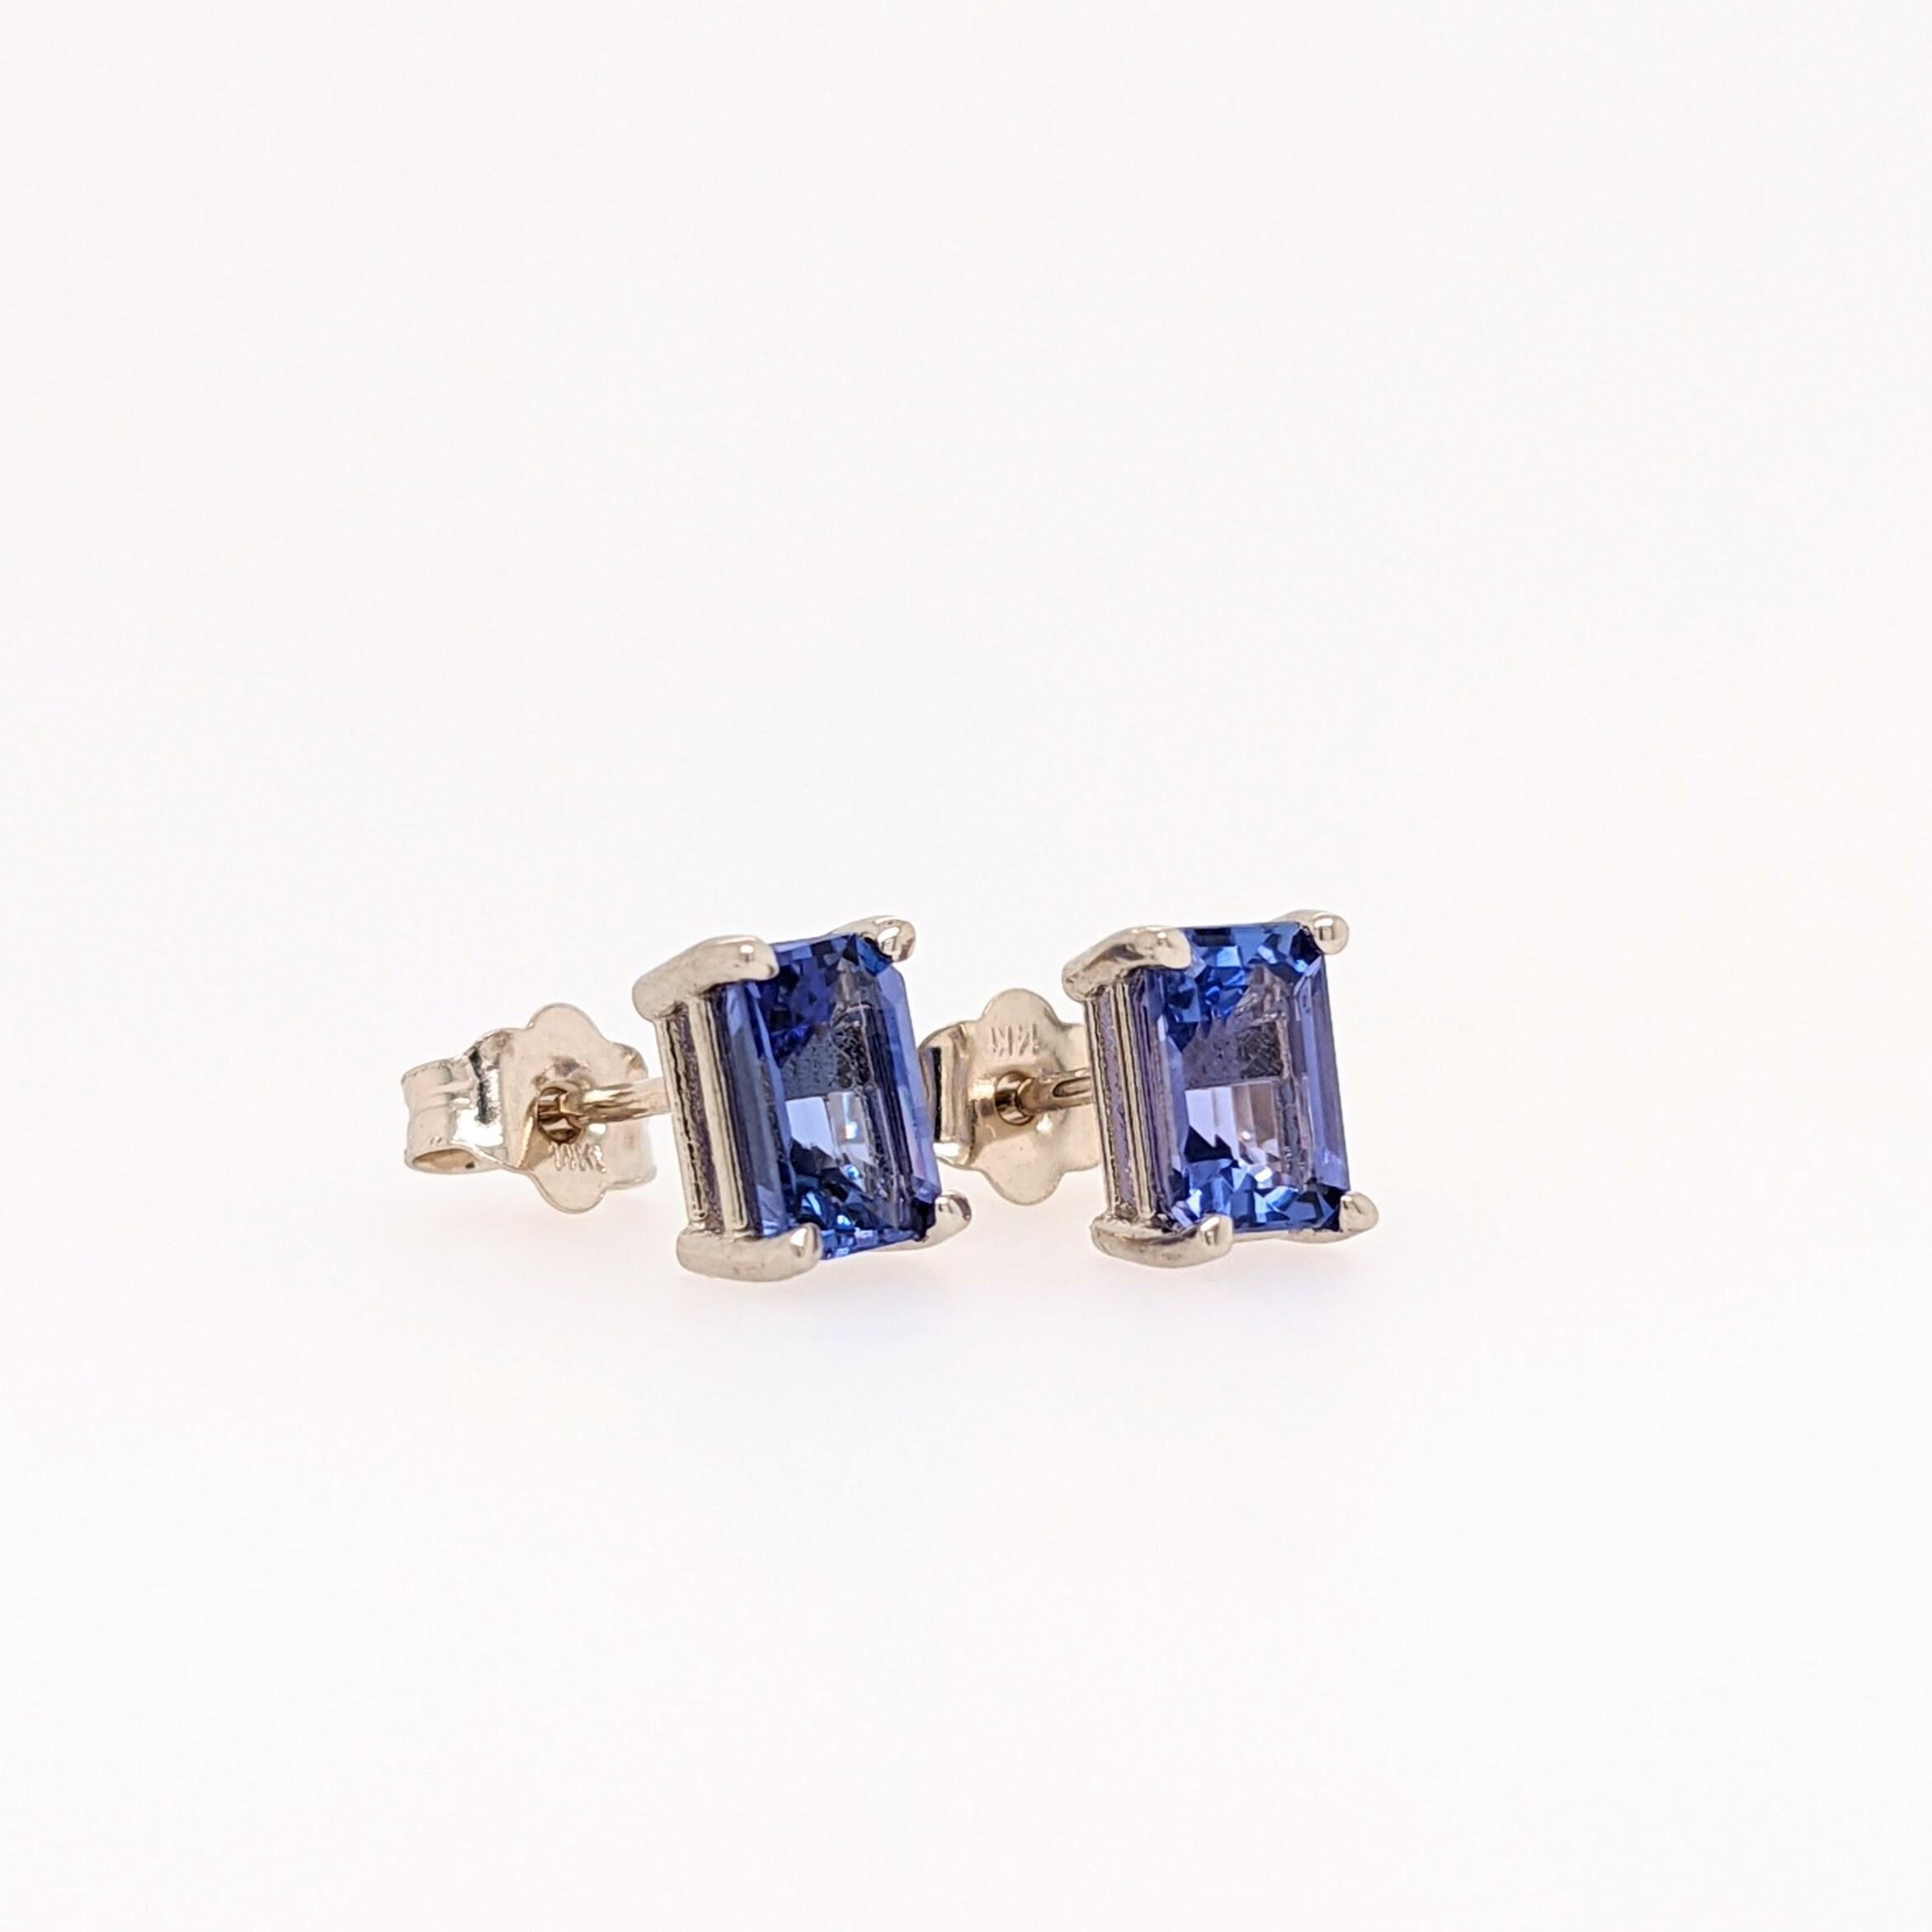 Gorgeous blue Tanzanite with a tinge of purple, these minimalist stud earrings are a great daily look! Available in solid 14k white, yellow or rose gold with push backings that click securely into place for easy and safe wear. 

Specifications: